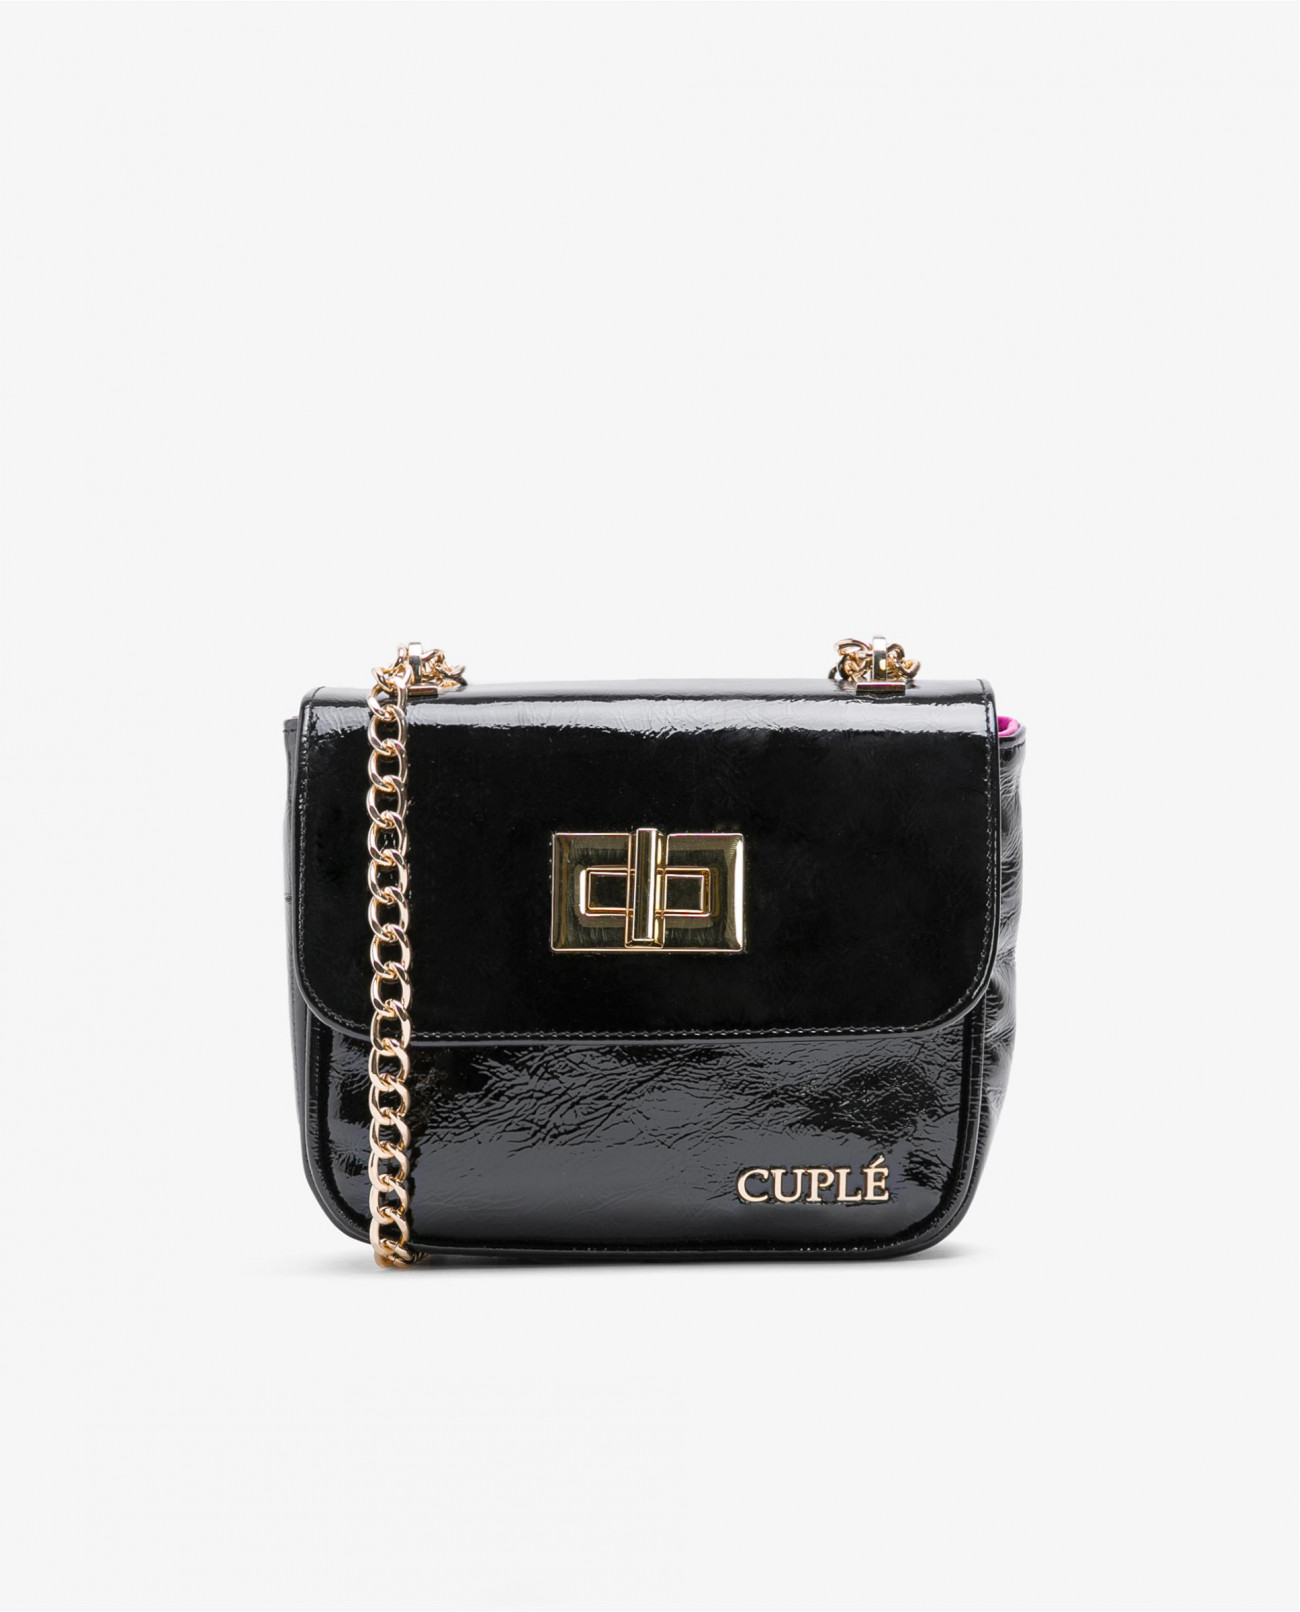 Guess Make Up Pouches Bag Holder Black Patent Leather – Omniphustoys